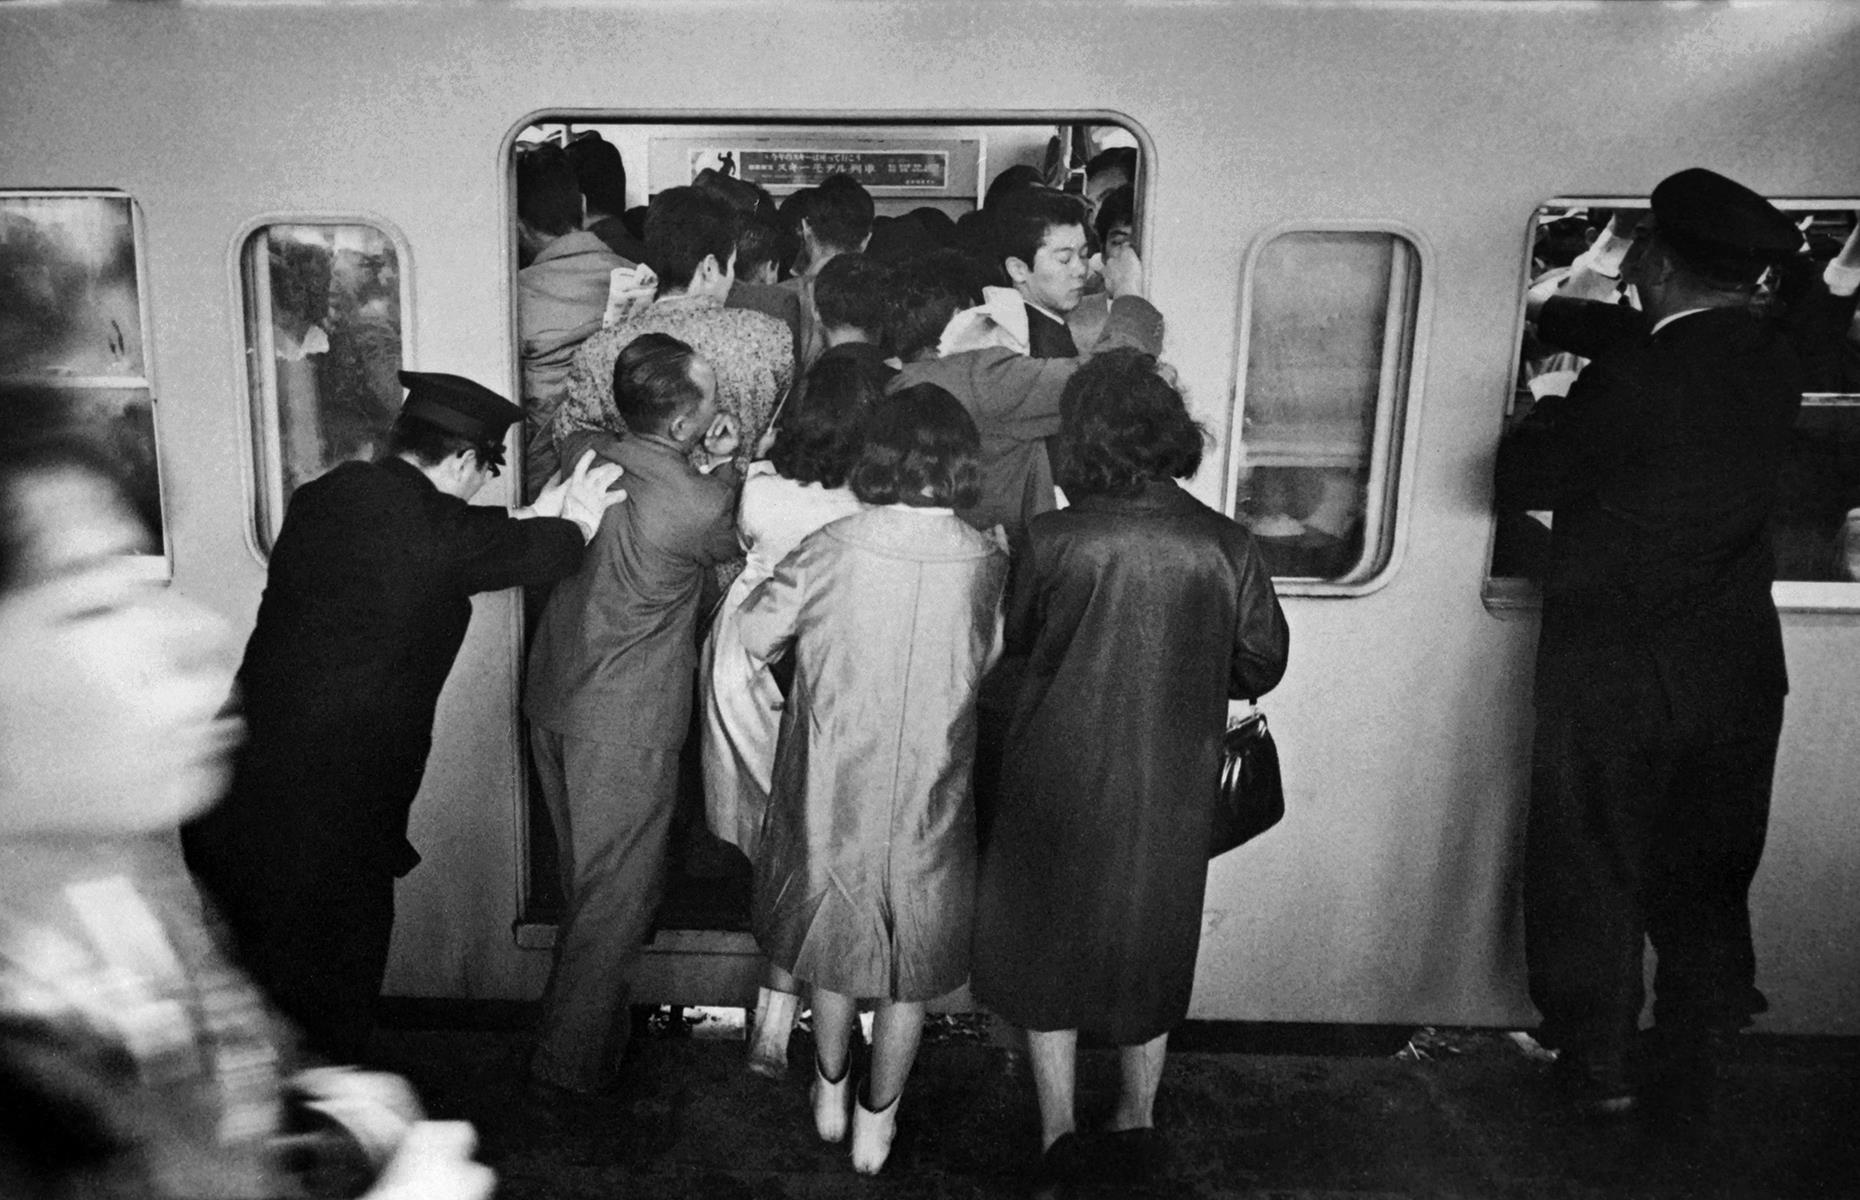 The stations are just as busy northeast of Osaka, in Japan's capital. In this photograph from the 1960s, station guards attempt to cram passengers onto a subway car before the doors close. Scenes like this are still common on Tokyo's sprawling subway network today – in fact, railway attendants nicknamed "pushers" exist with the job of pressing commuters onto heaving trains at rush hour.